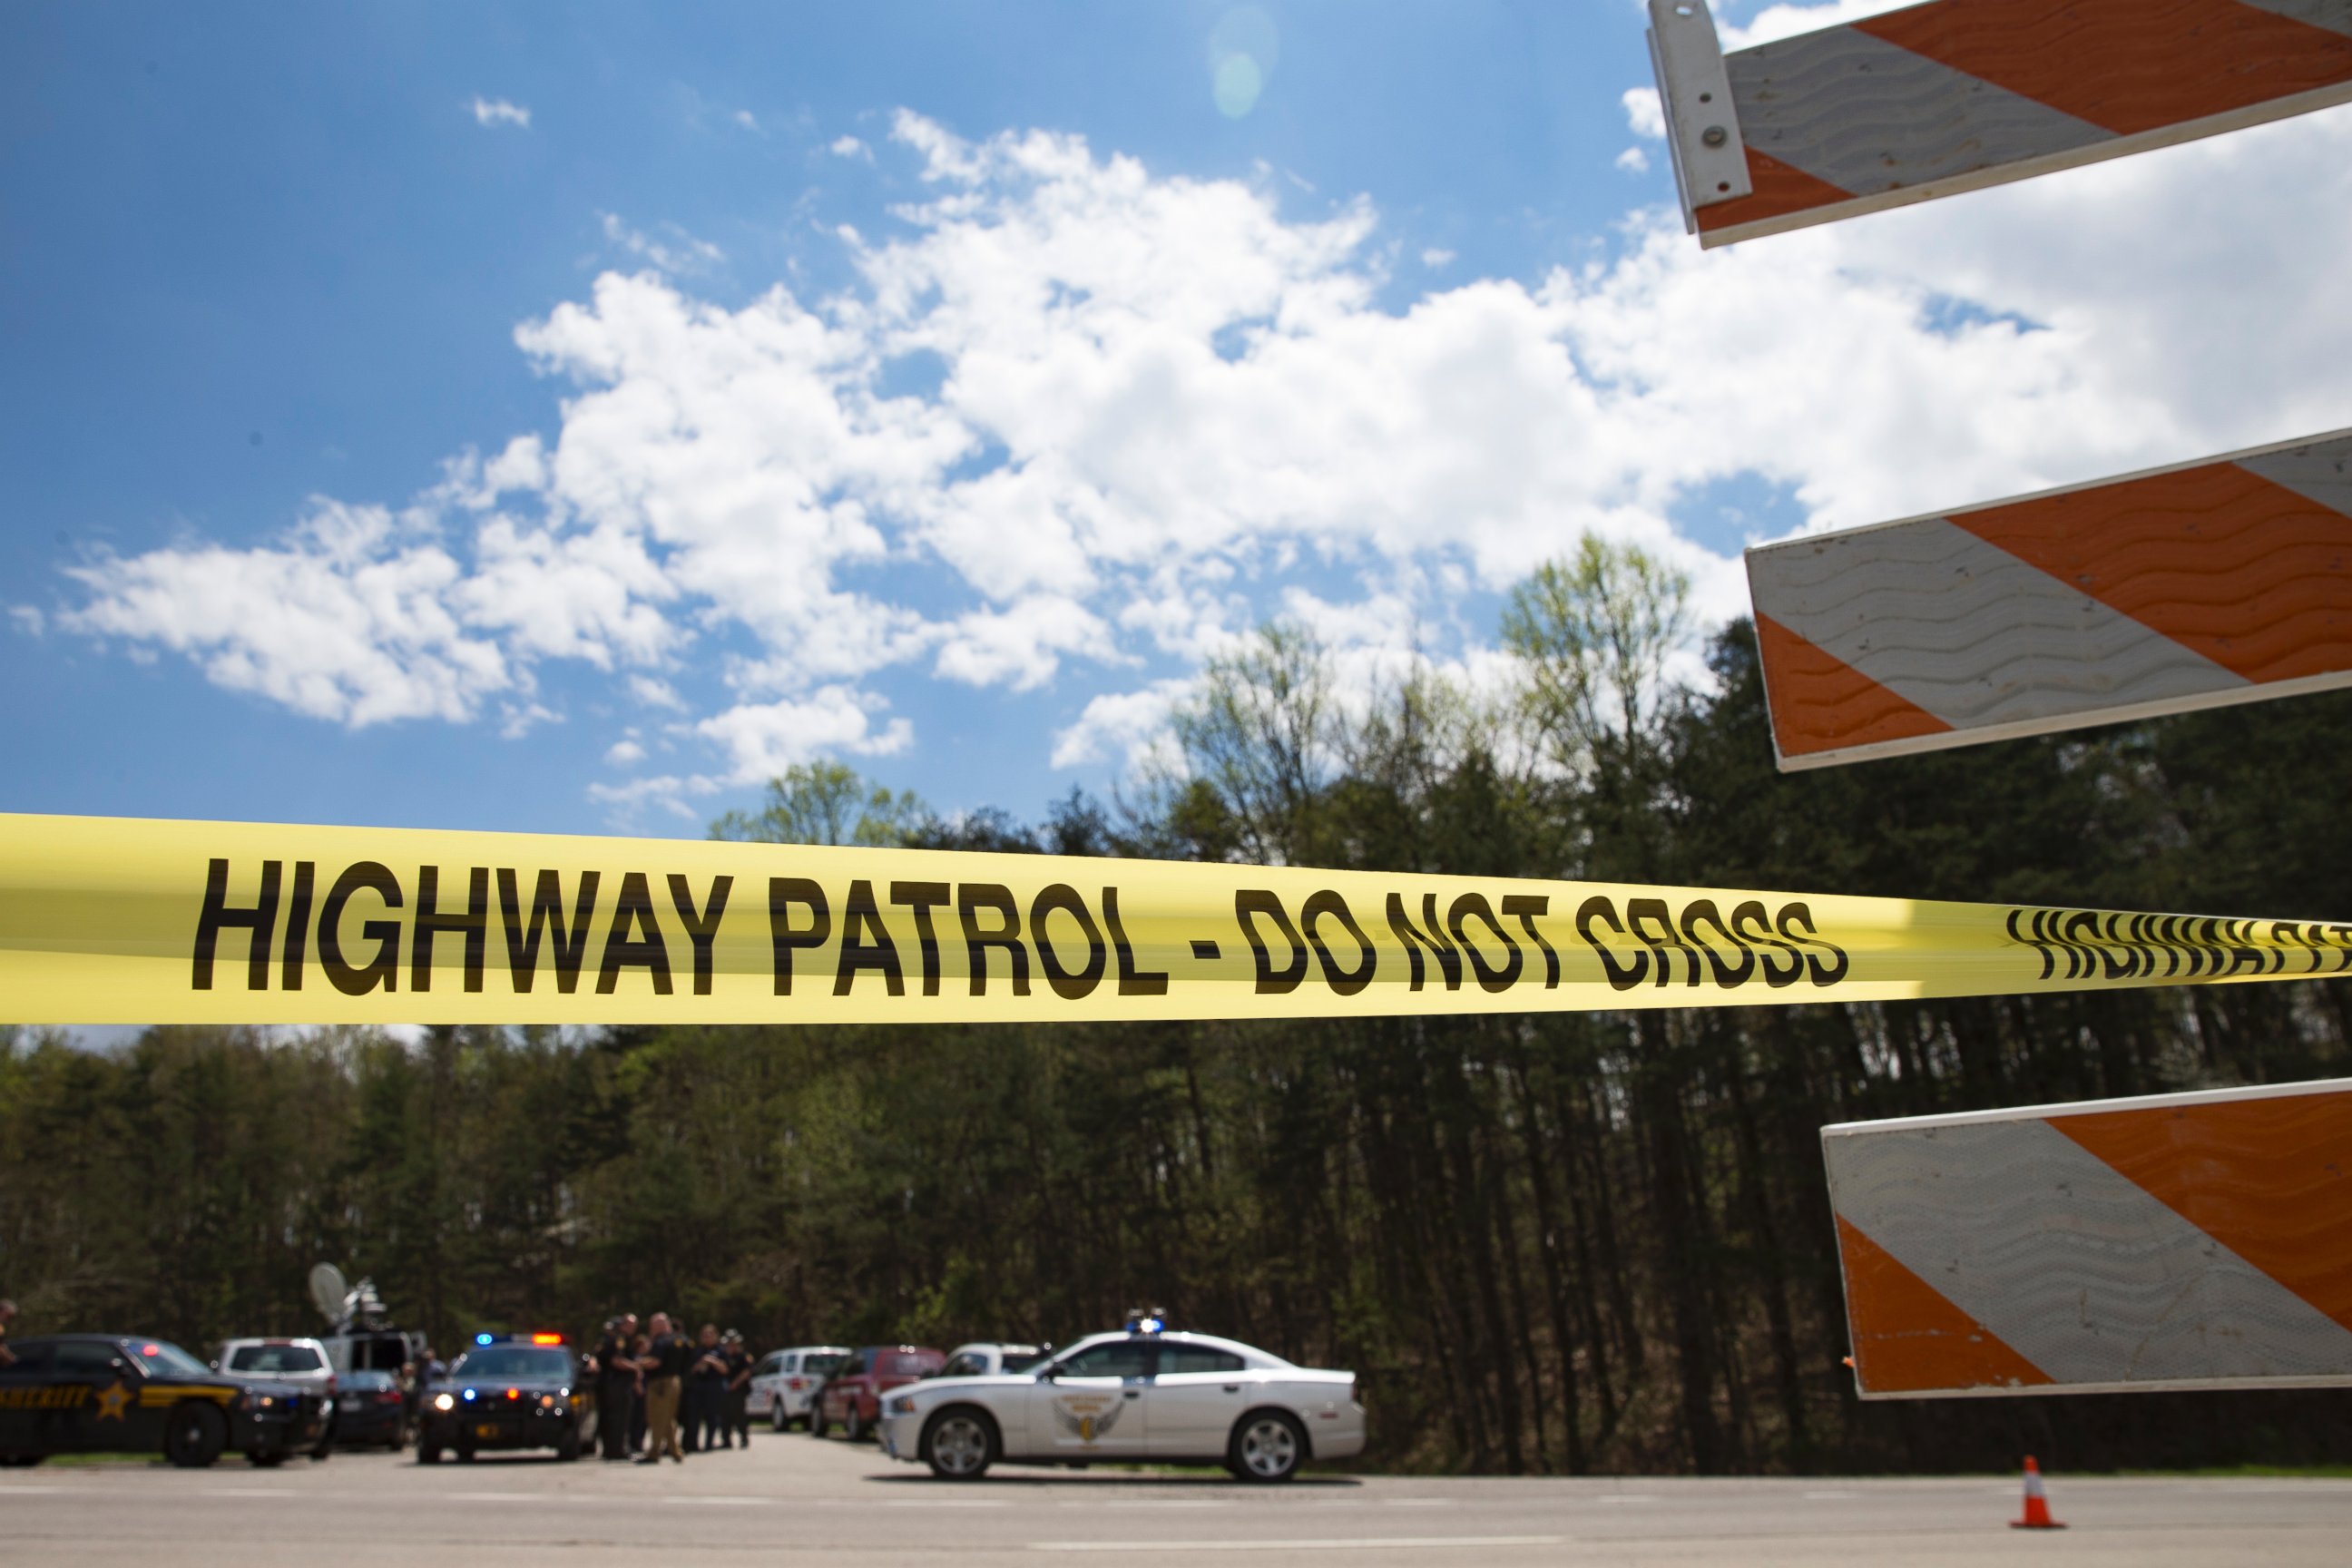 PHOTO: Police tape is deployed across from the Union Hill Road exit off Route 32 at a crime scene perimeter, April 22, 2016, in Pike County, Ohio. 